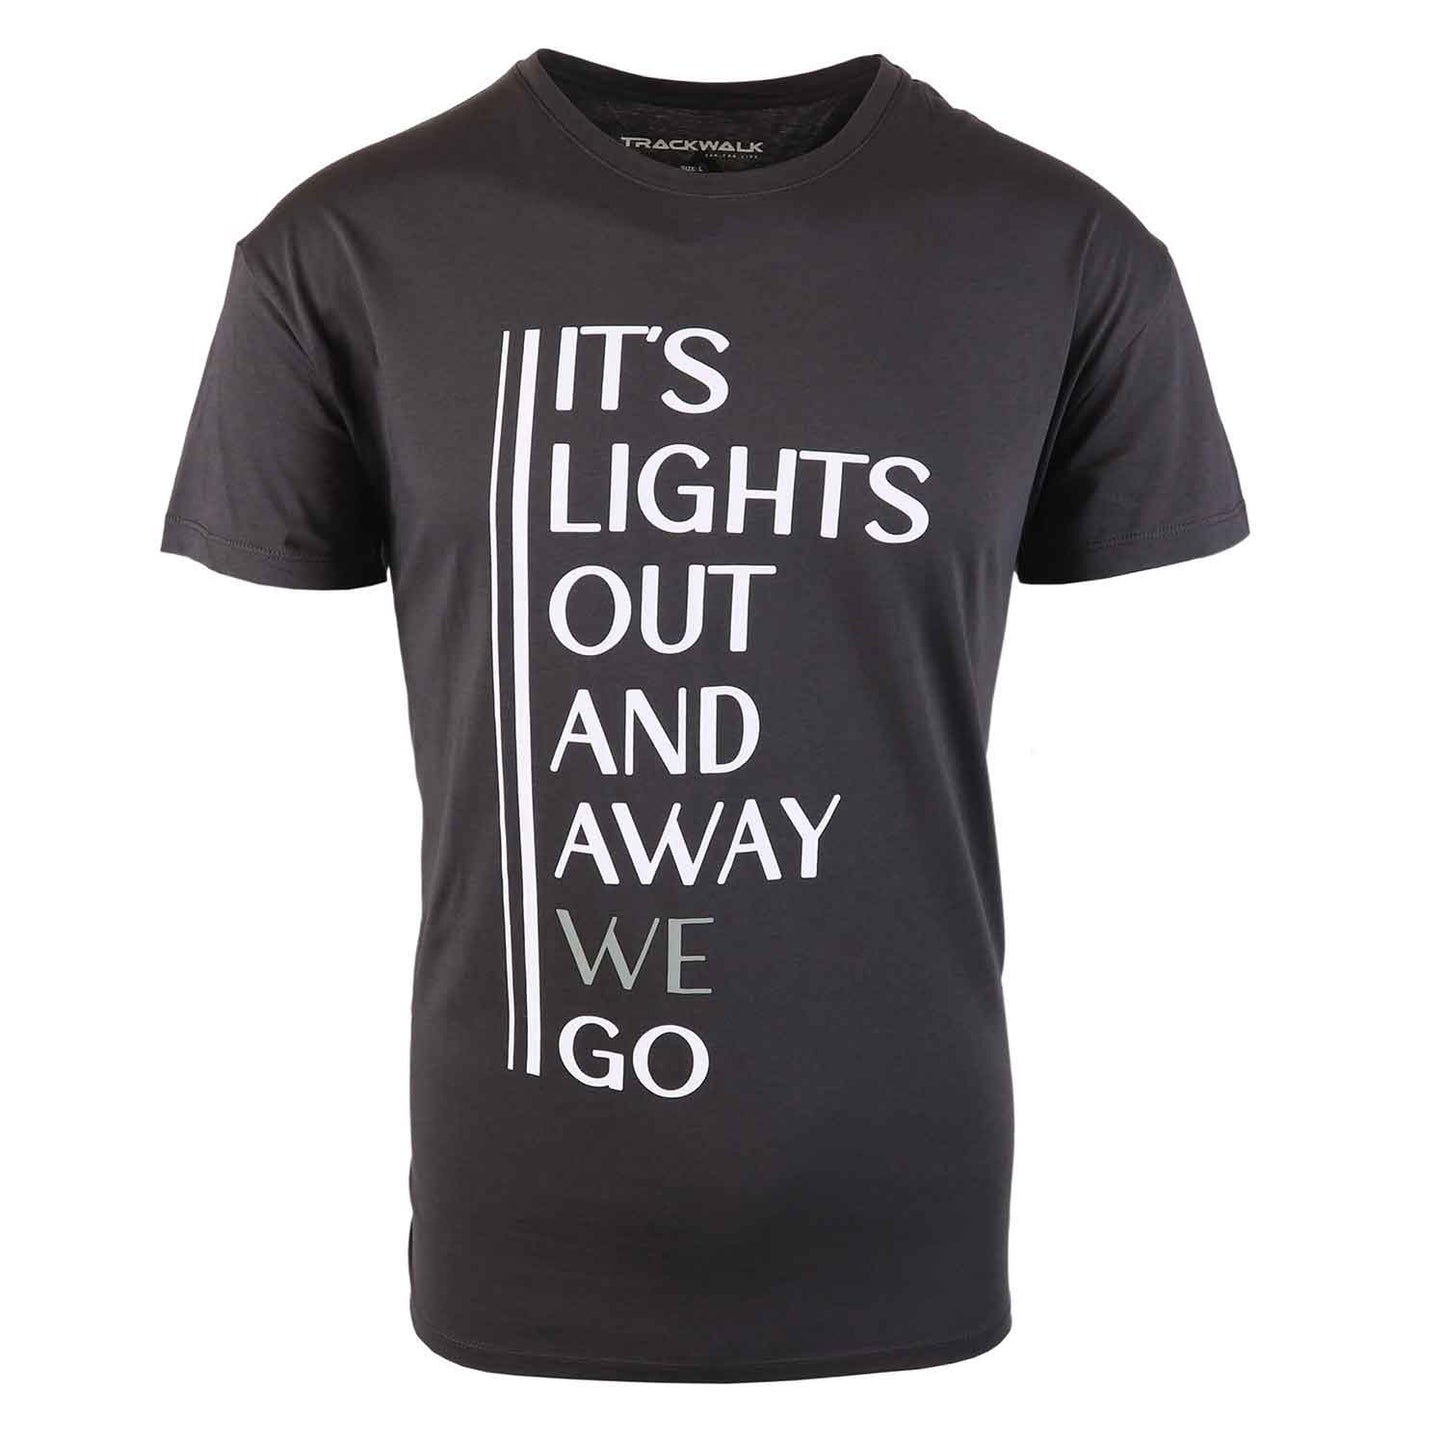 Men's T-shirt ‘It’s lights out and away we go’